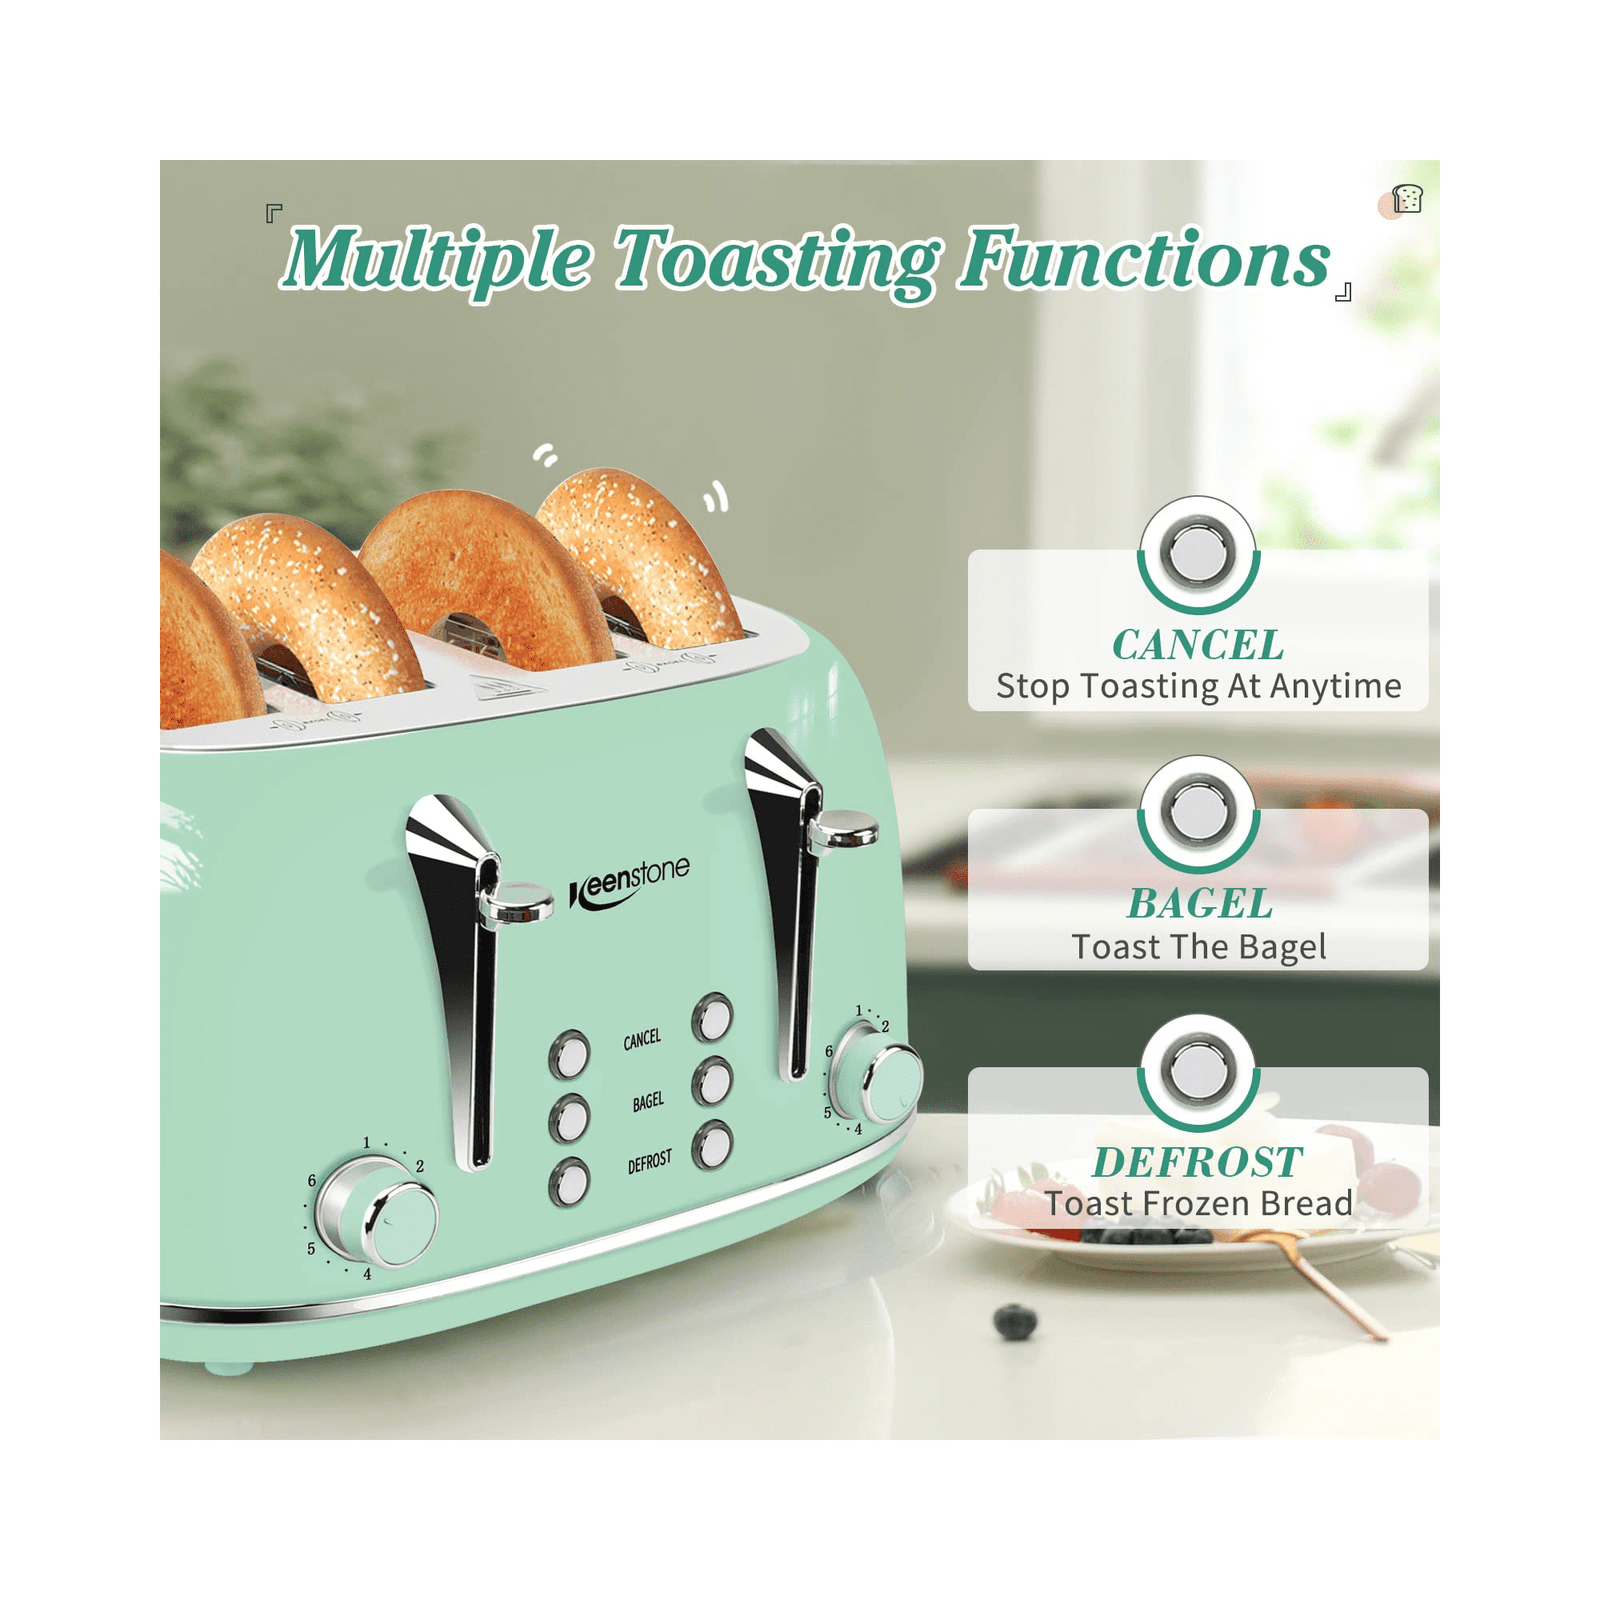 https://themarketdepot.com/wp-content/uploads/2023/01/Toasters-4-Slice-Keenstone-Retro-Stainless-Steel-Bagel-Toaster-with-Wide-Slots-Green-1.png